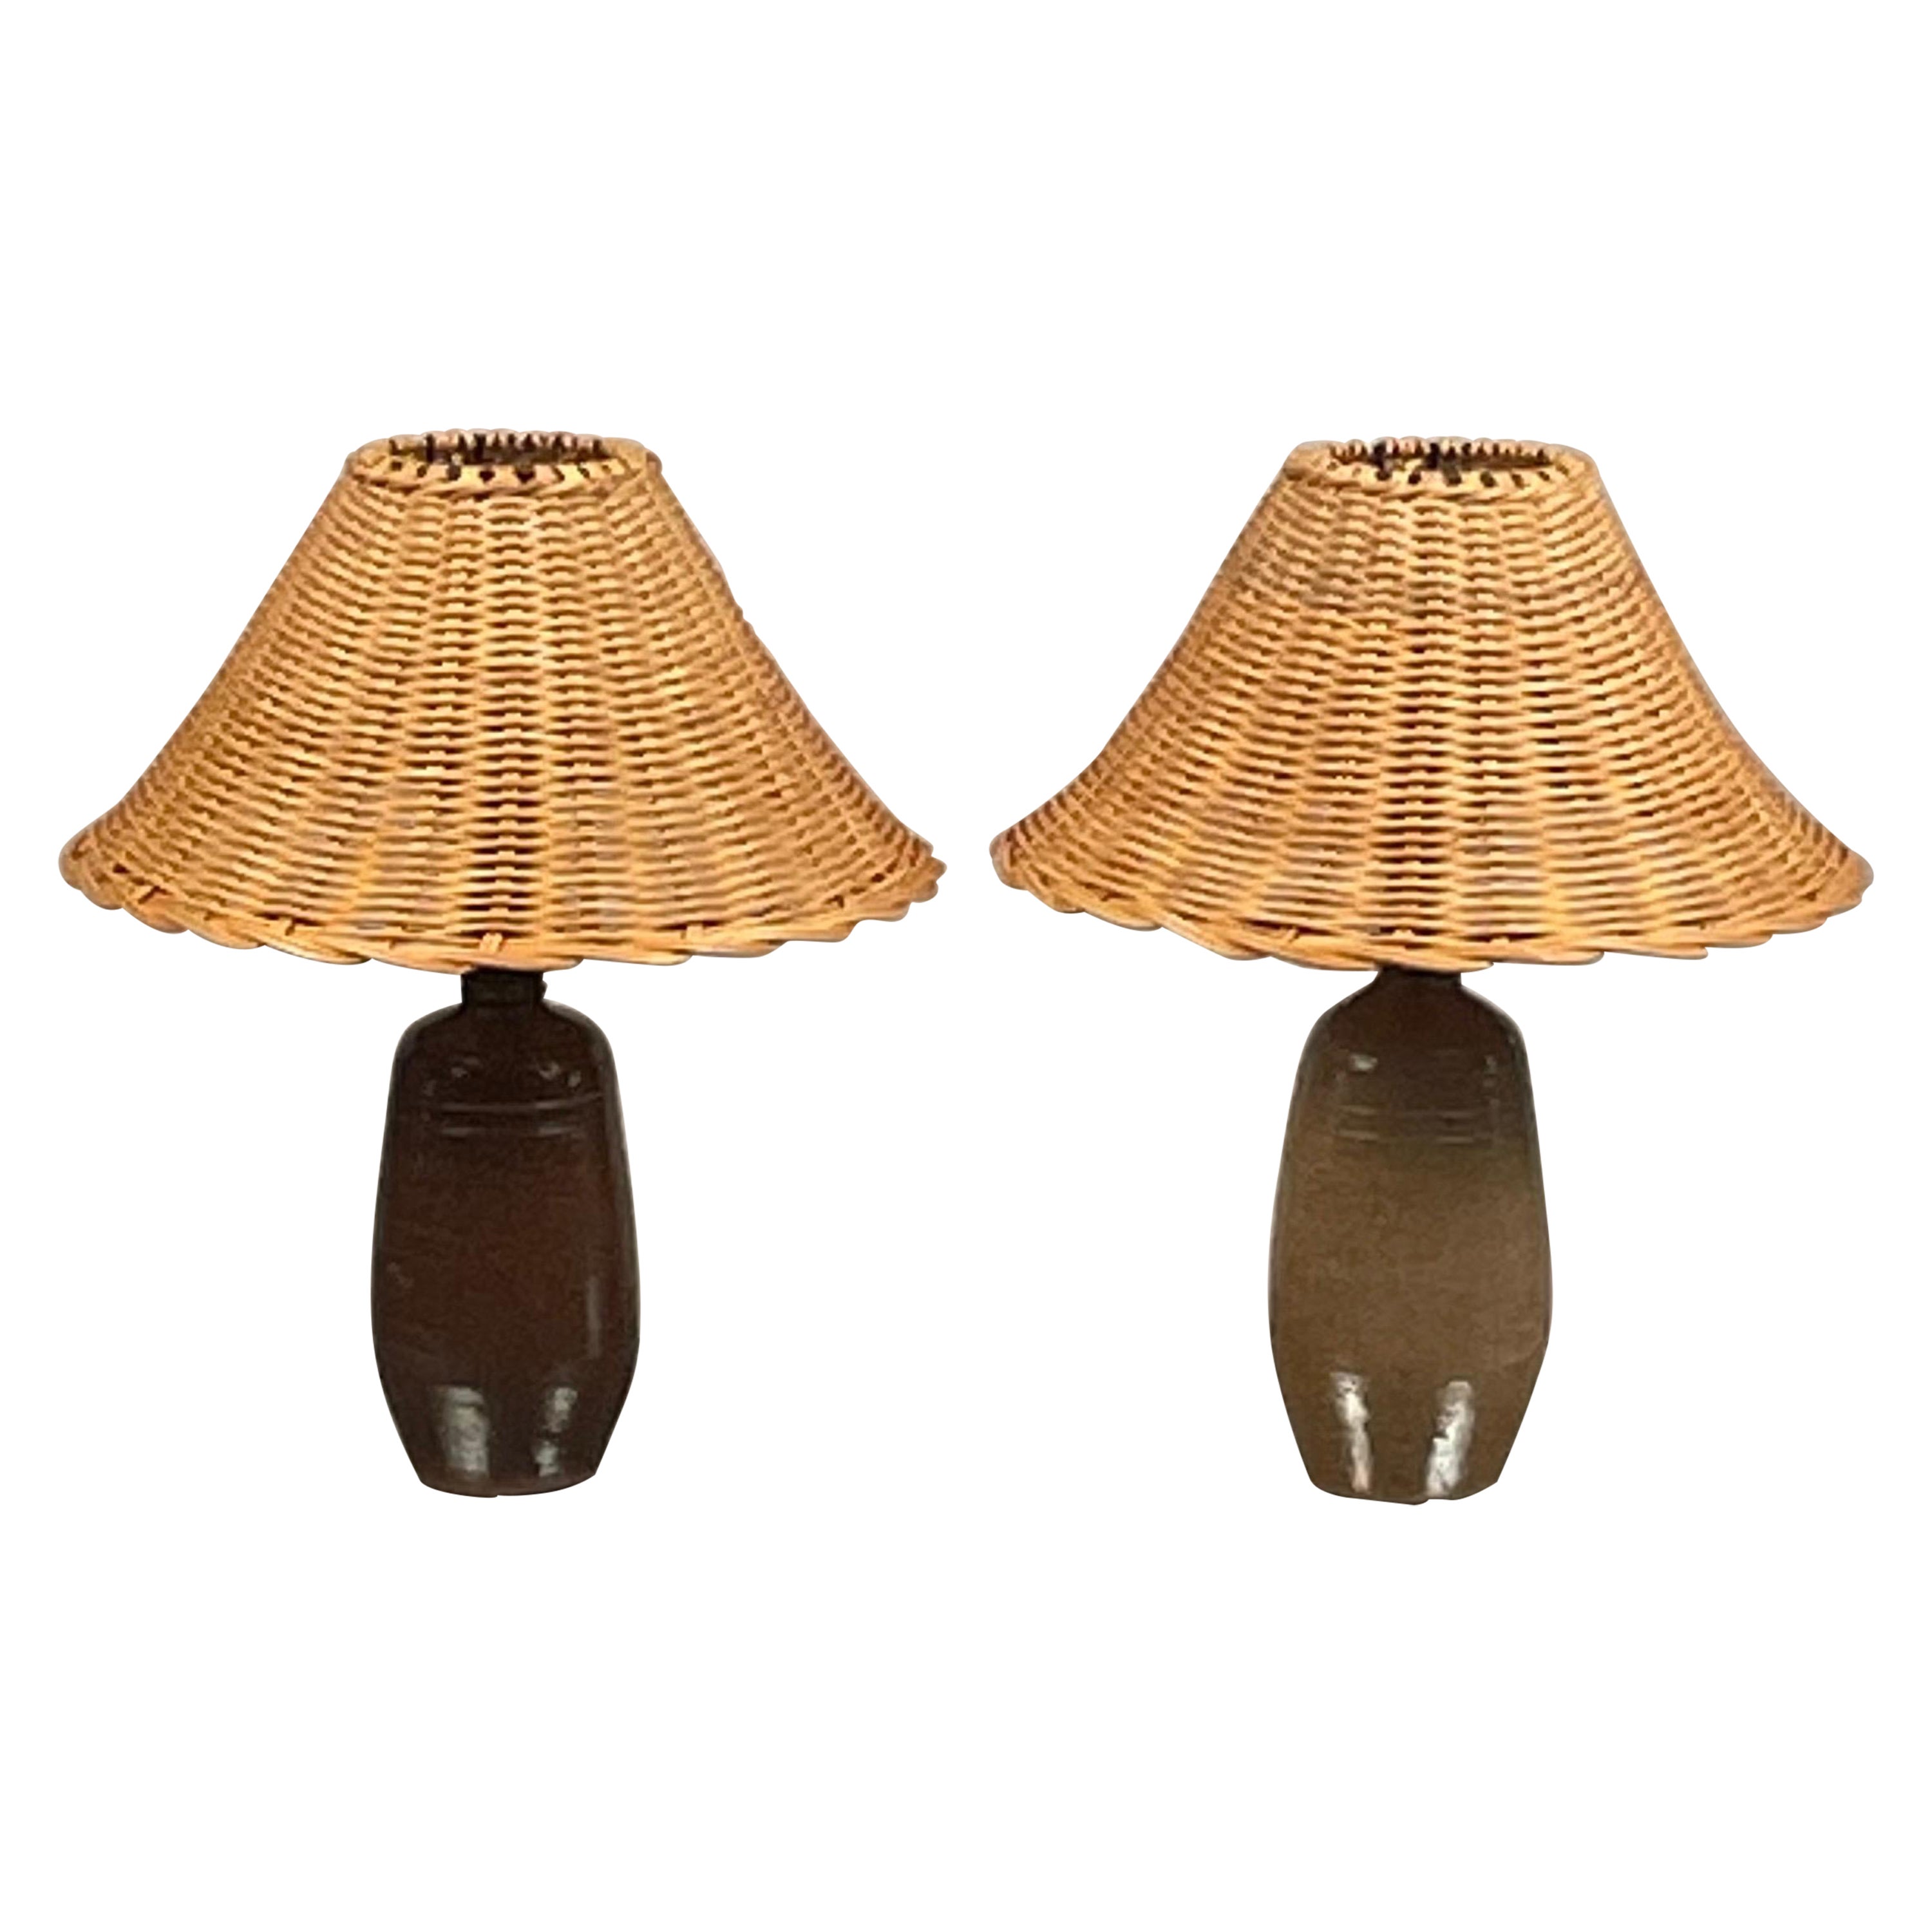 Pair of Chic "Gourde" Terracotta and Rattan Lamps by Design Frères For Sale